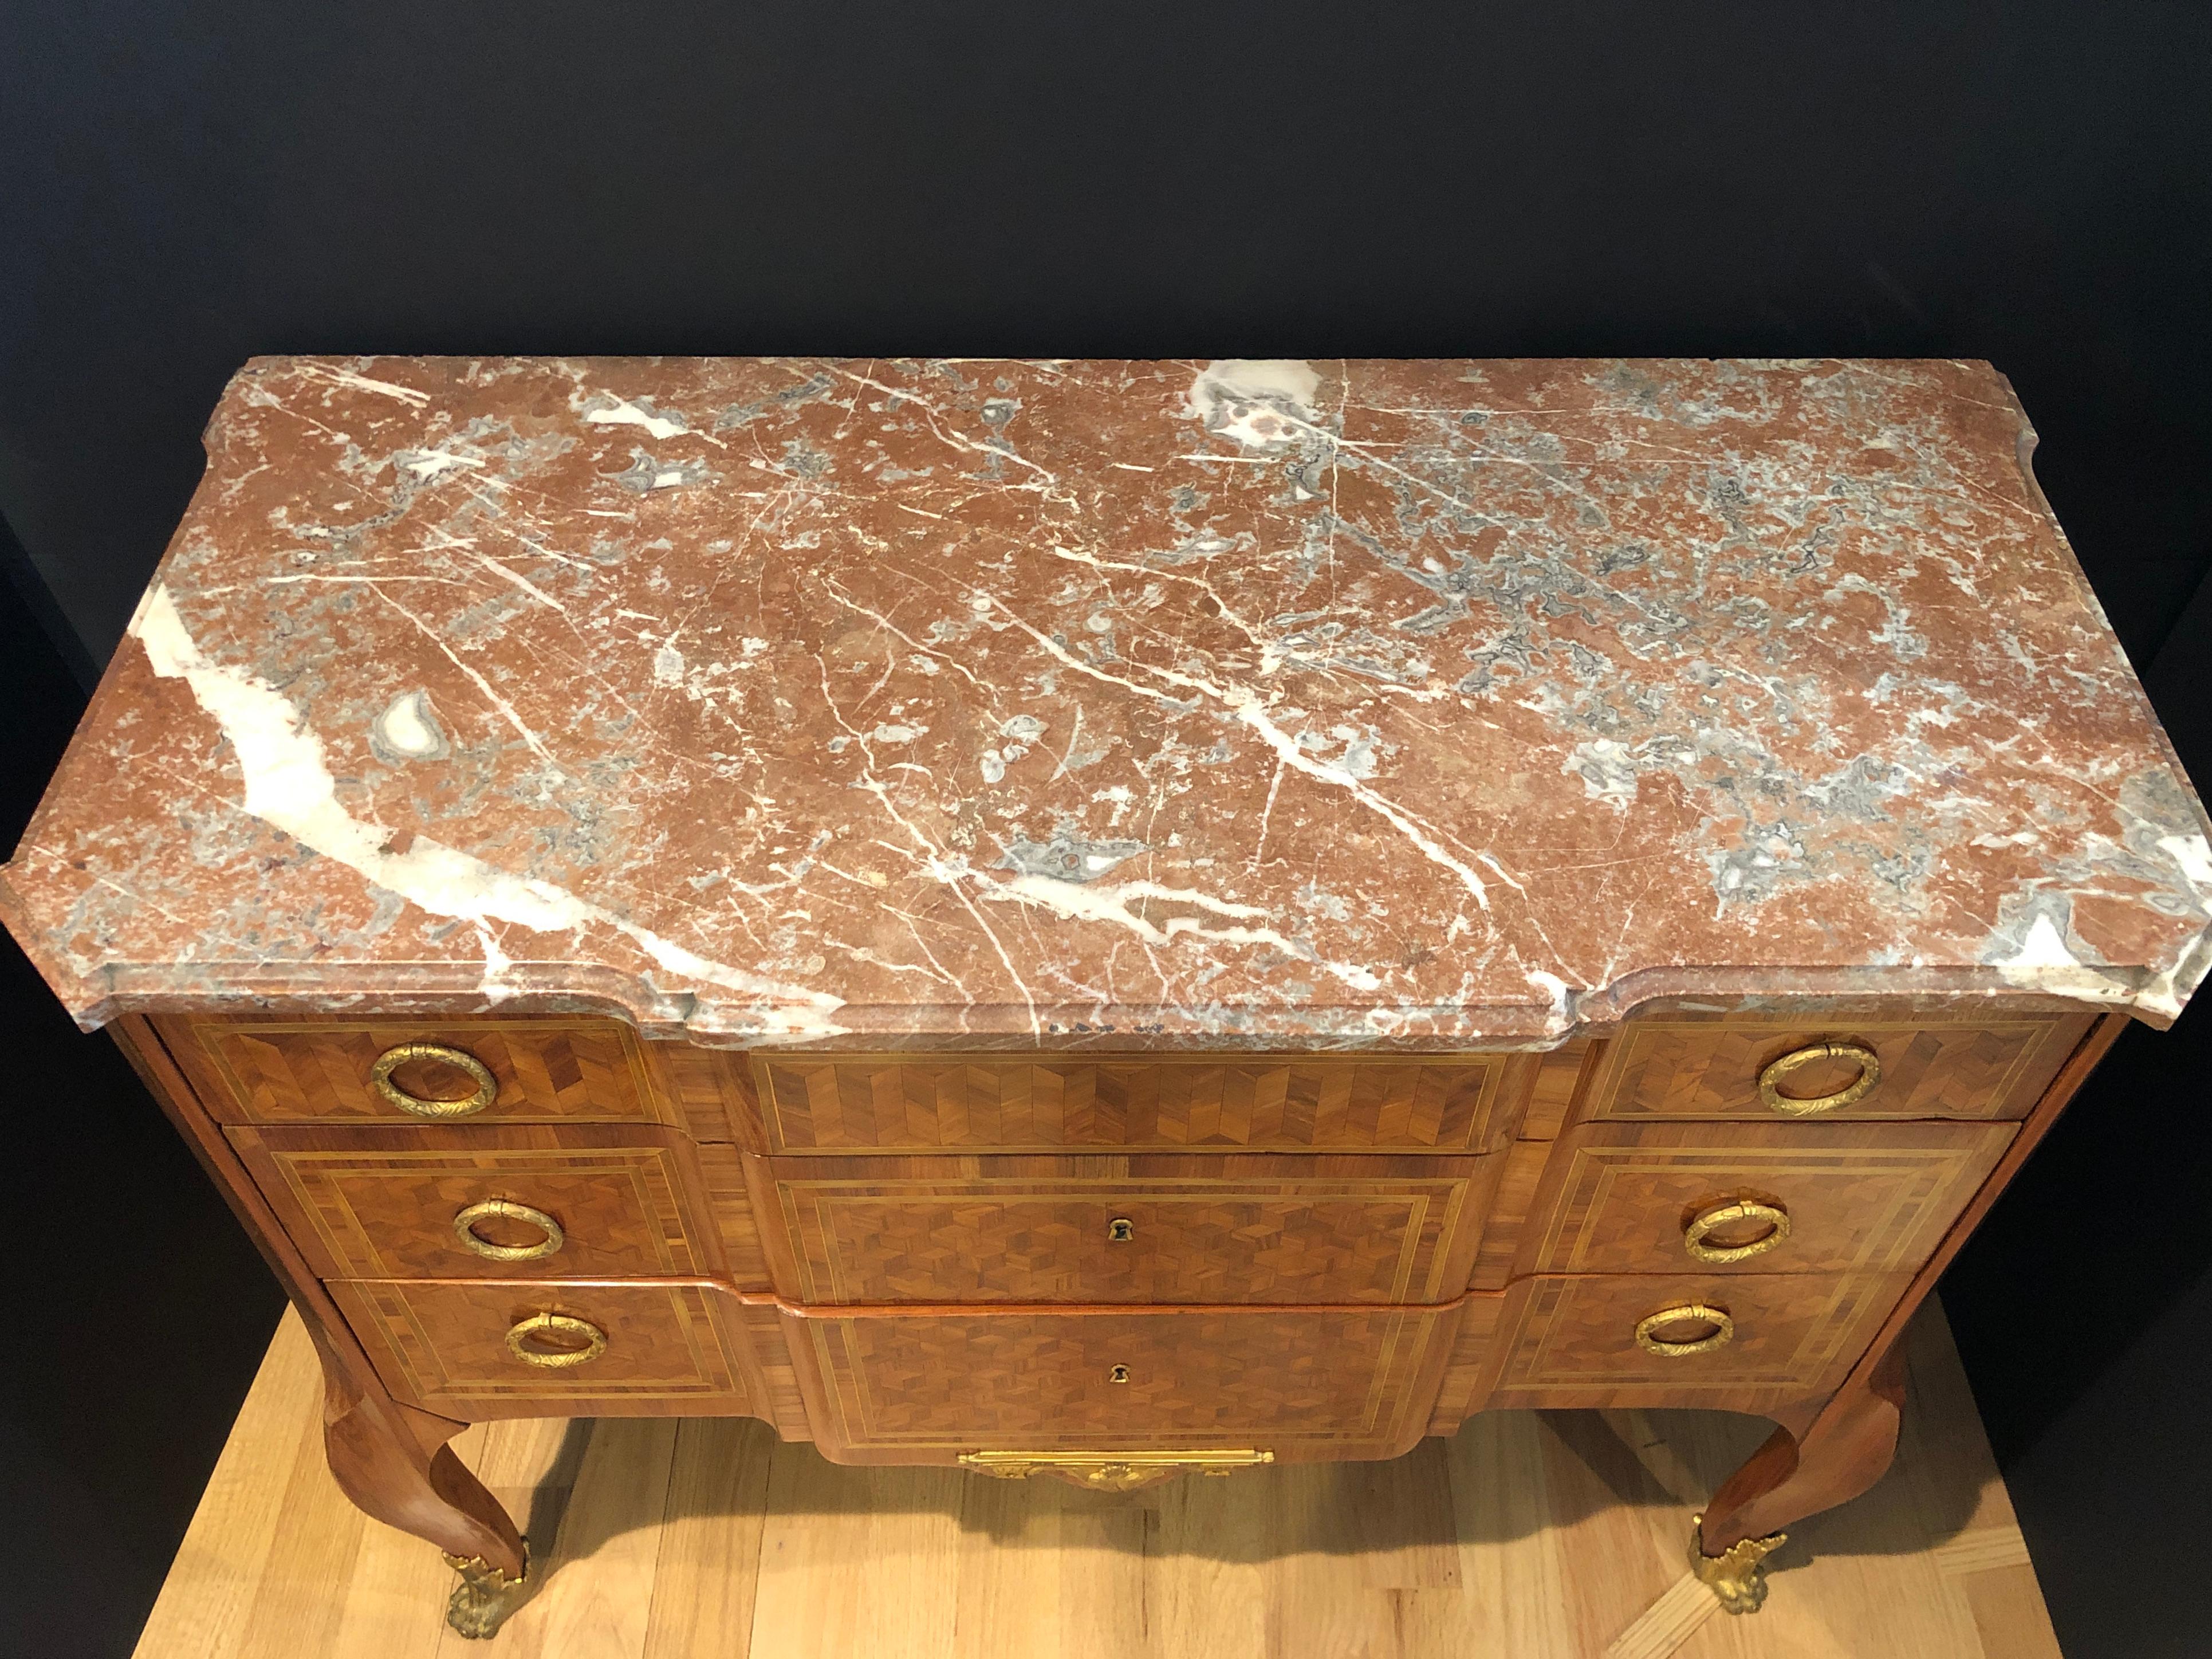 French 19th century Louis XVI marble-top marquetry commode. Remarkable parquetry inlay work defines this mahogany and kingwood commode. A beautifully mottled marble top, block front, and deeply chamfered front corners are welcome design elements